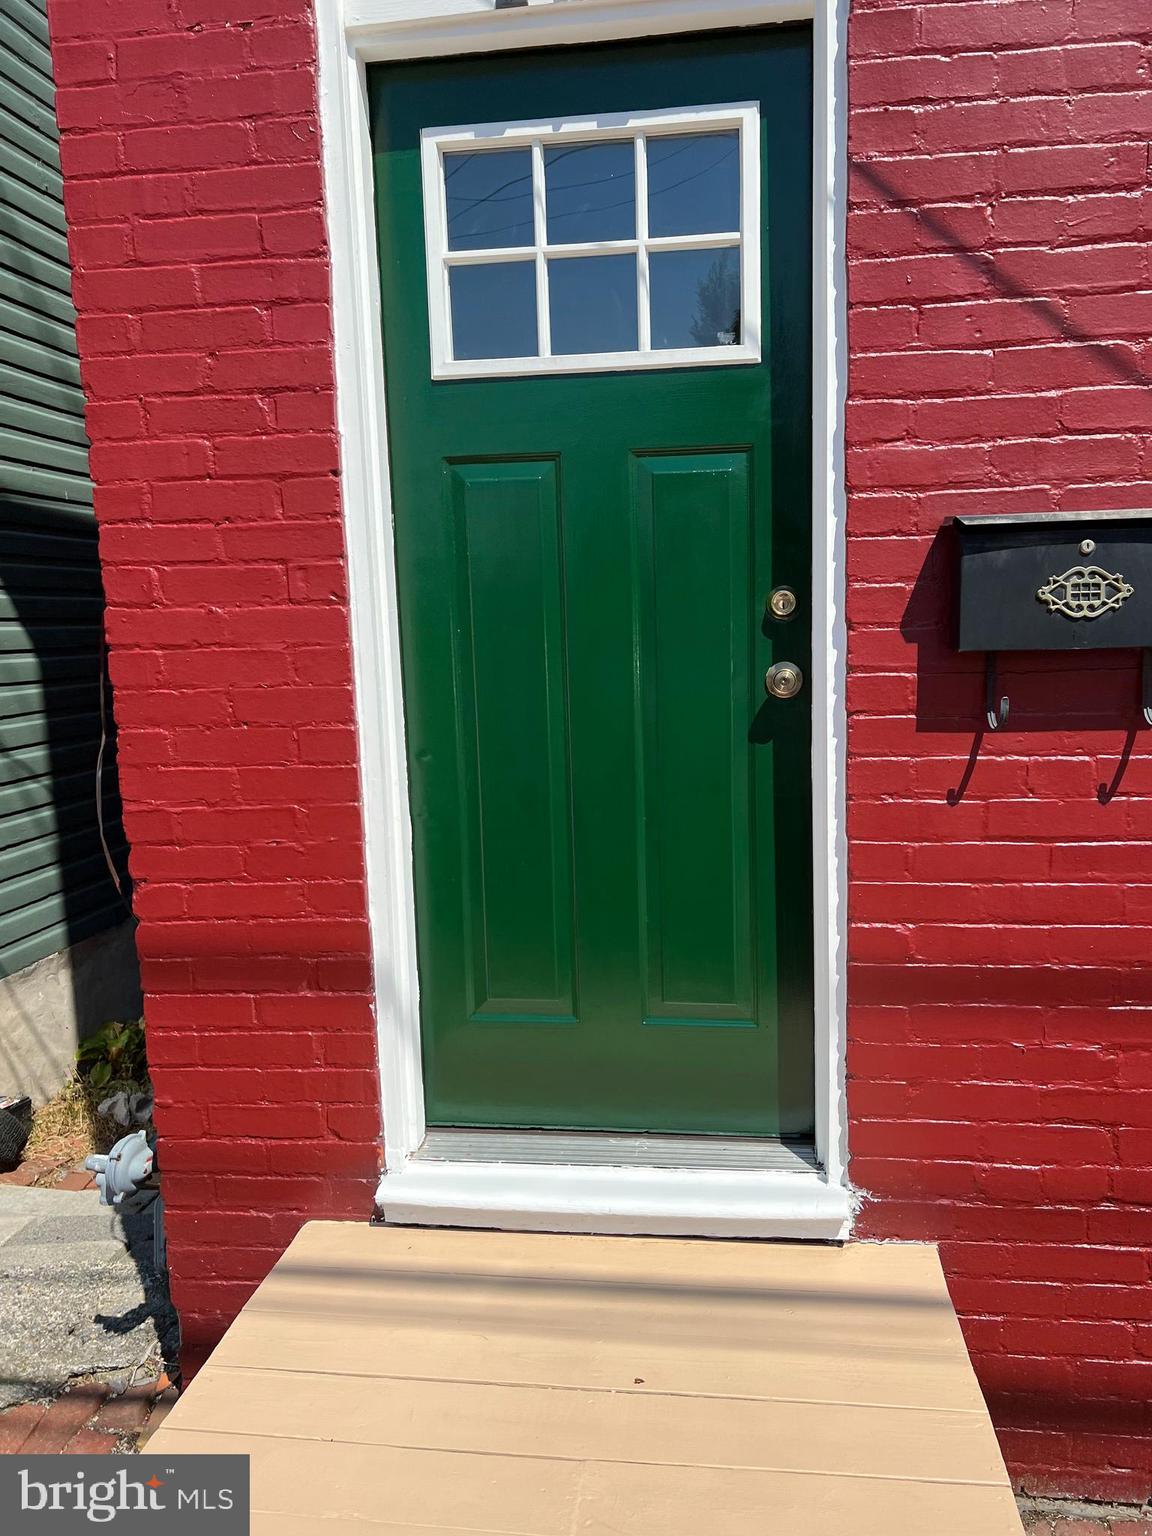 a view of a brick house with a green door